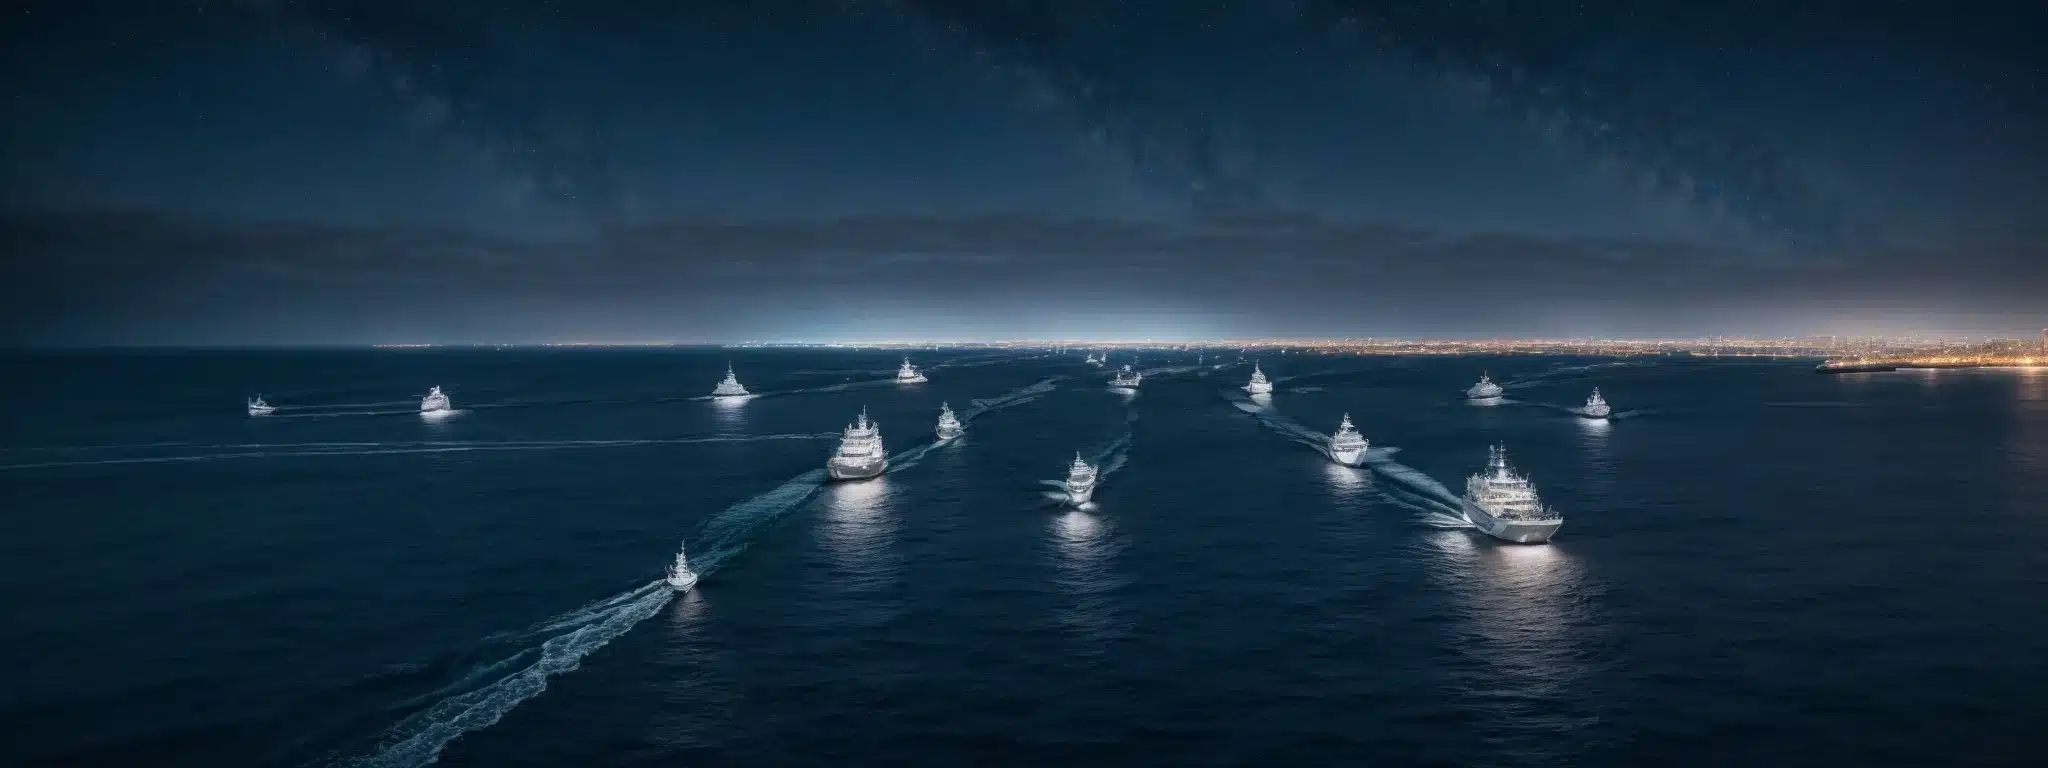 A Vast Ocean With Various Ships, Some In The Distance And Others Close By, Navigating The Intricate Waters Under A Starry Sky.